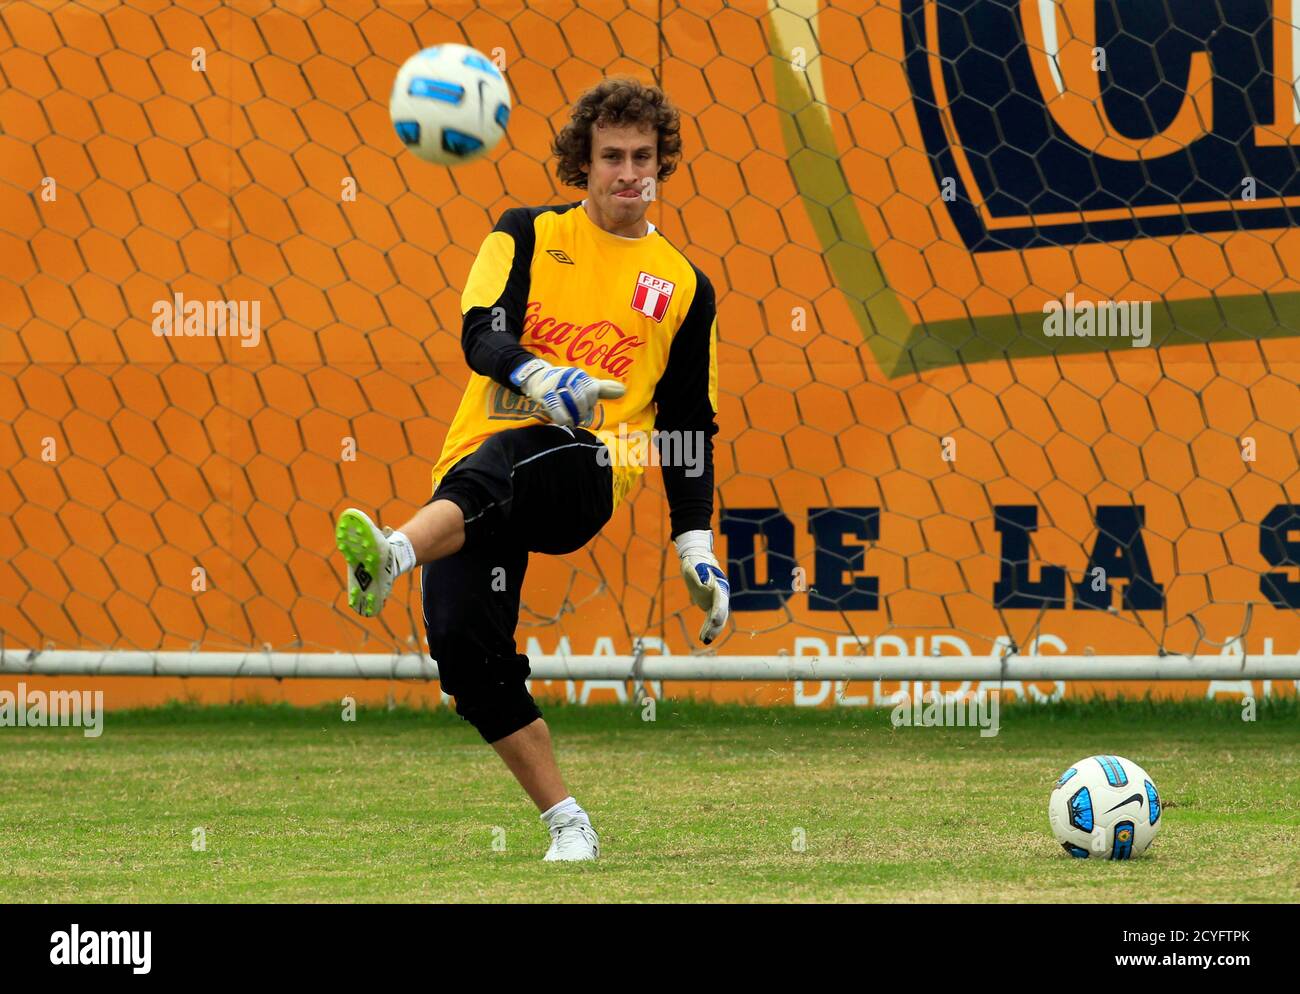 Salomon Libman goalkeeper of Peru's national soccer team attends a practice  session ahead of the Copa America championship, in Lima June 23, 2011.  REUTERS/Pilar Olivares(PERU - Tags: SPORT SOCCER Stock Photo - Alamy